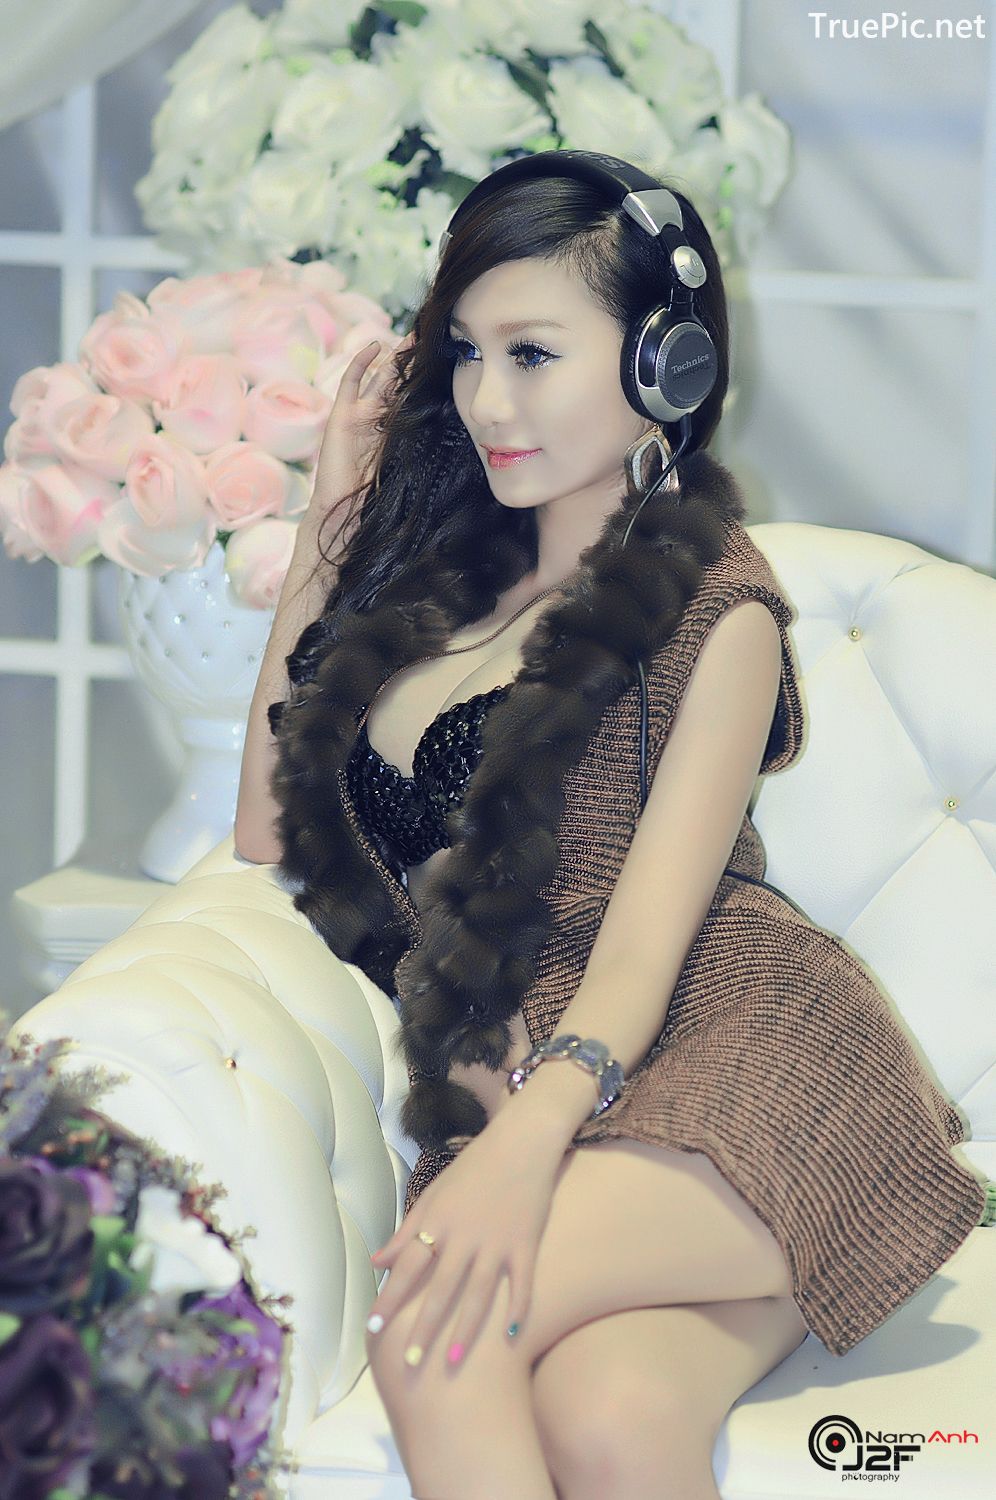 Image-Vietnamese-Model-Sexy-Beauty-of-Beautiful-Girls-Taken-by-NamAnh-Photography-1-TruePic.net- Picture-70